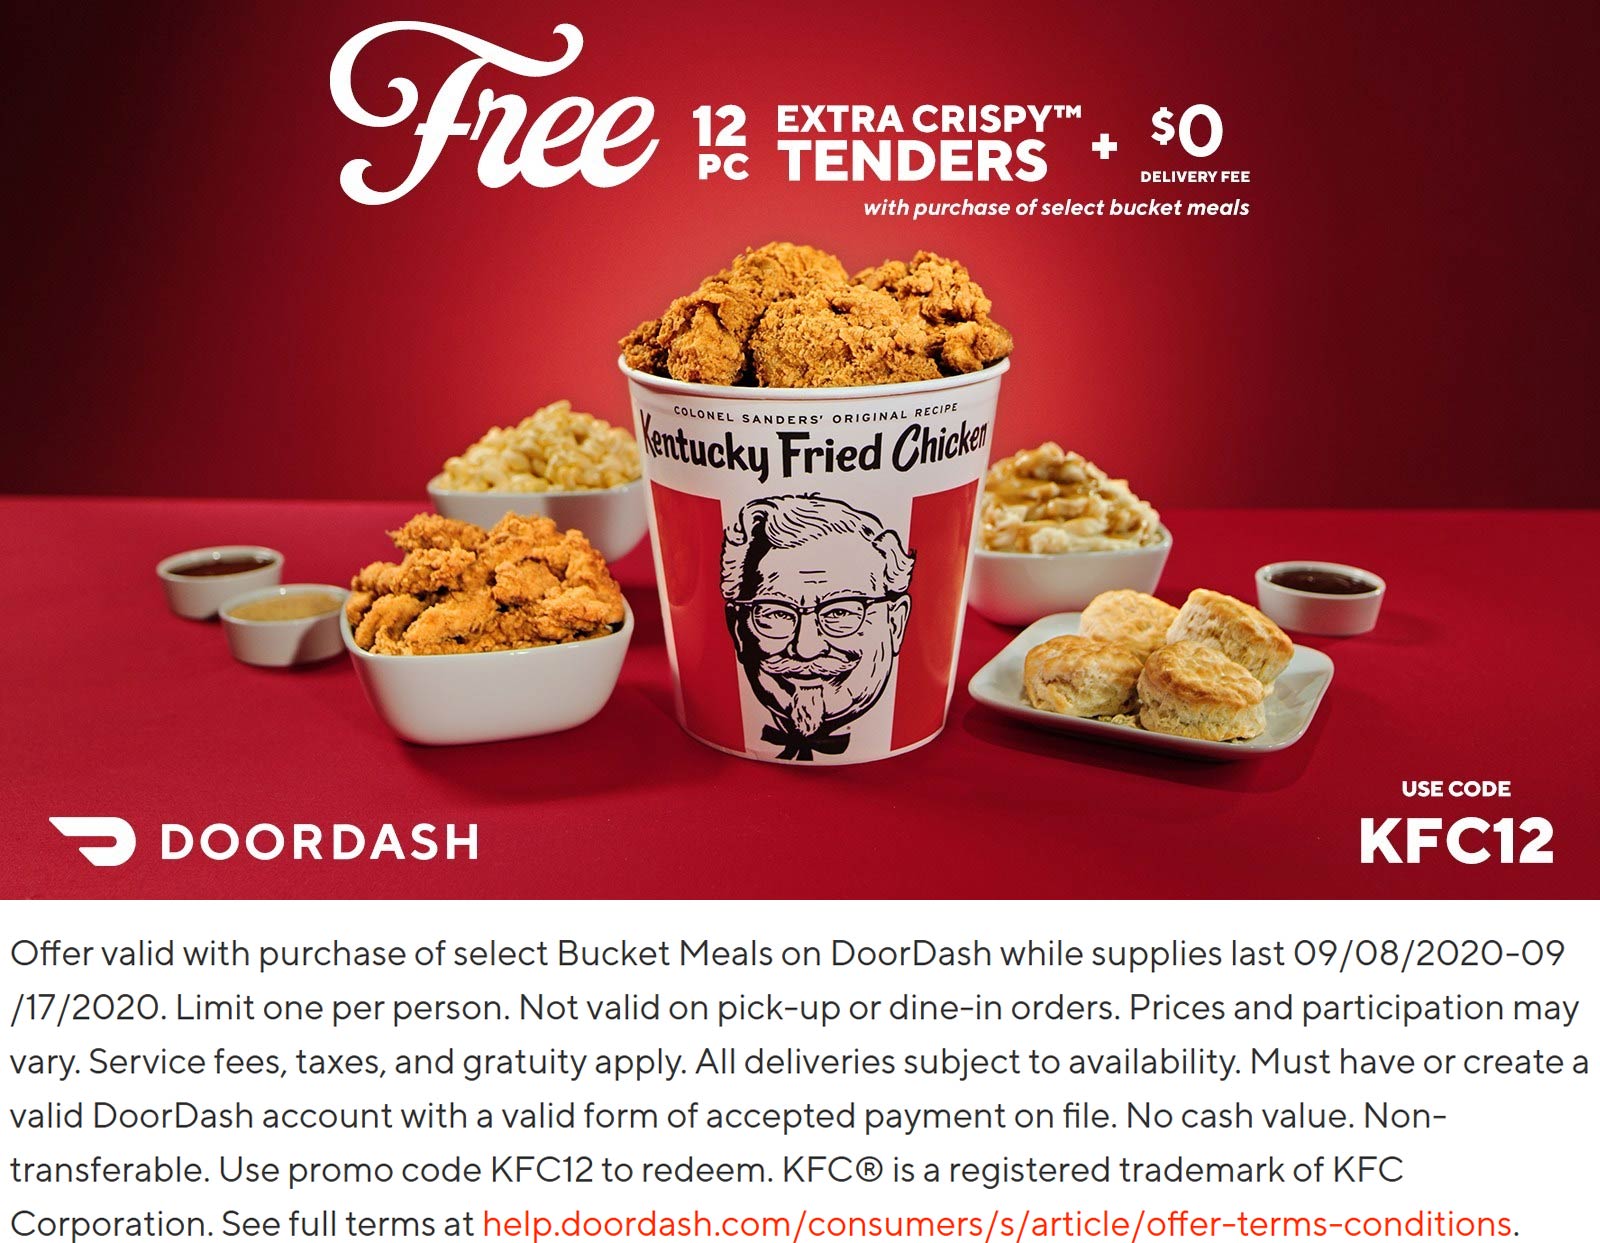 free-12pc-crispy-chicken-tenders-with-your-bucket-meal-at-kfc-via-free